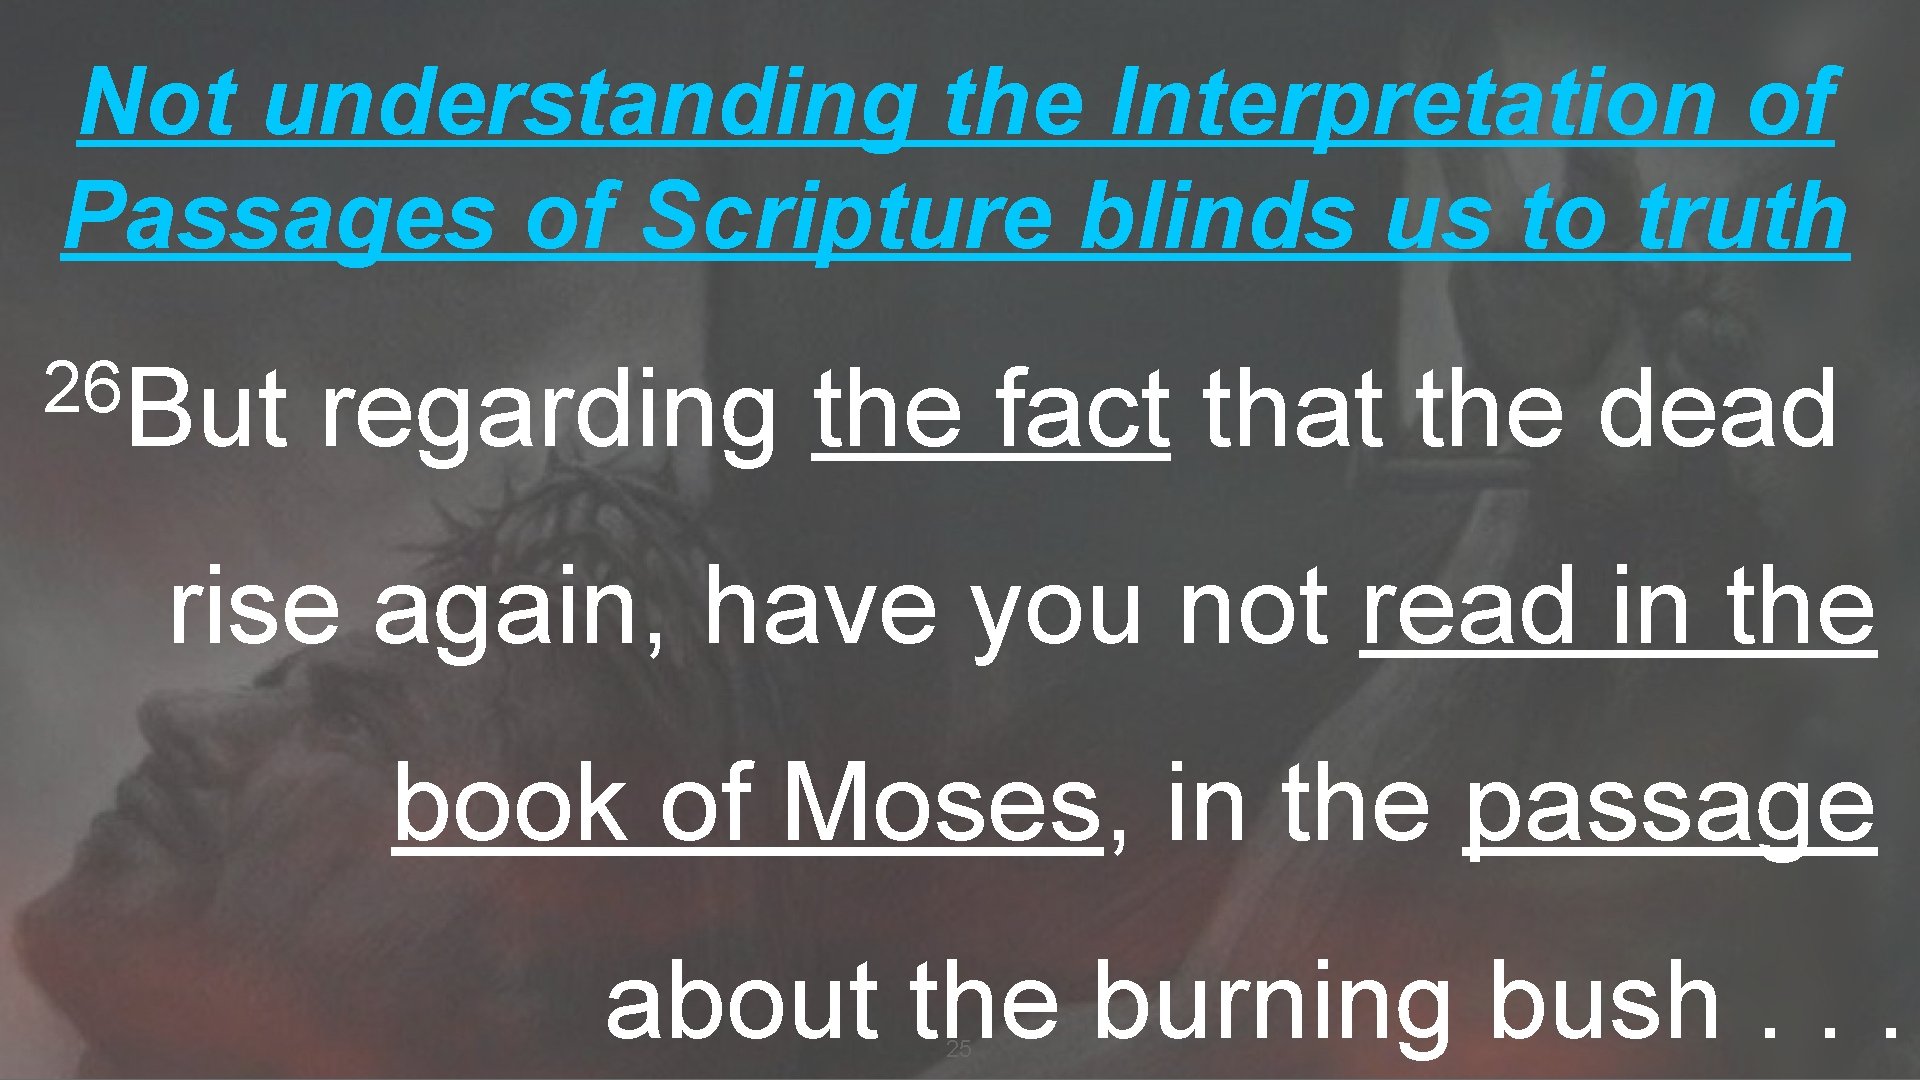 Not understanding the Interpretation of Passages of Scripture blinds us to truth 26 But